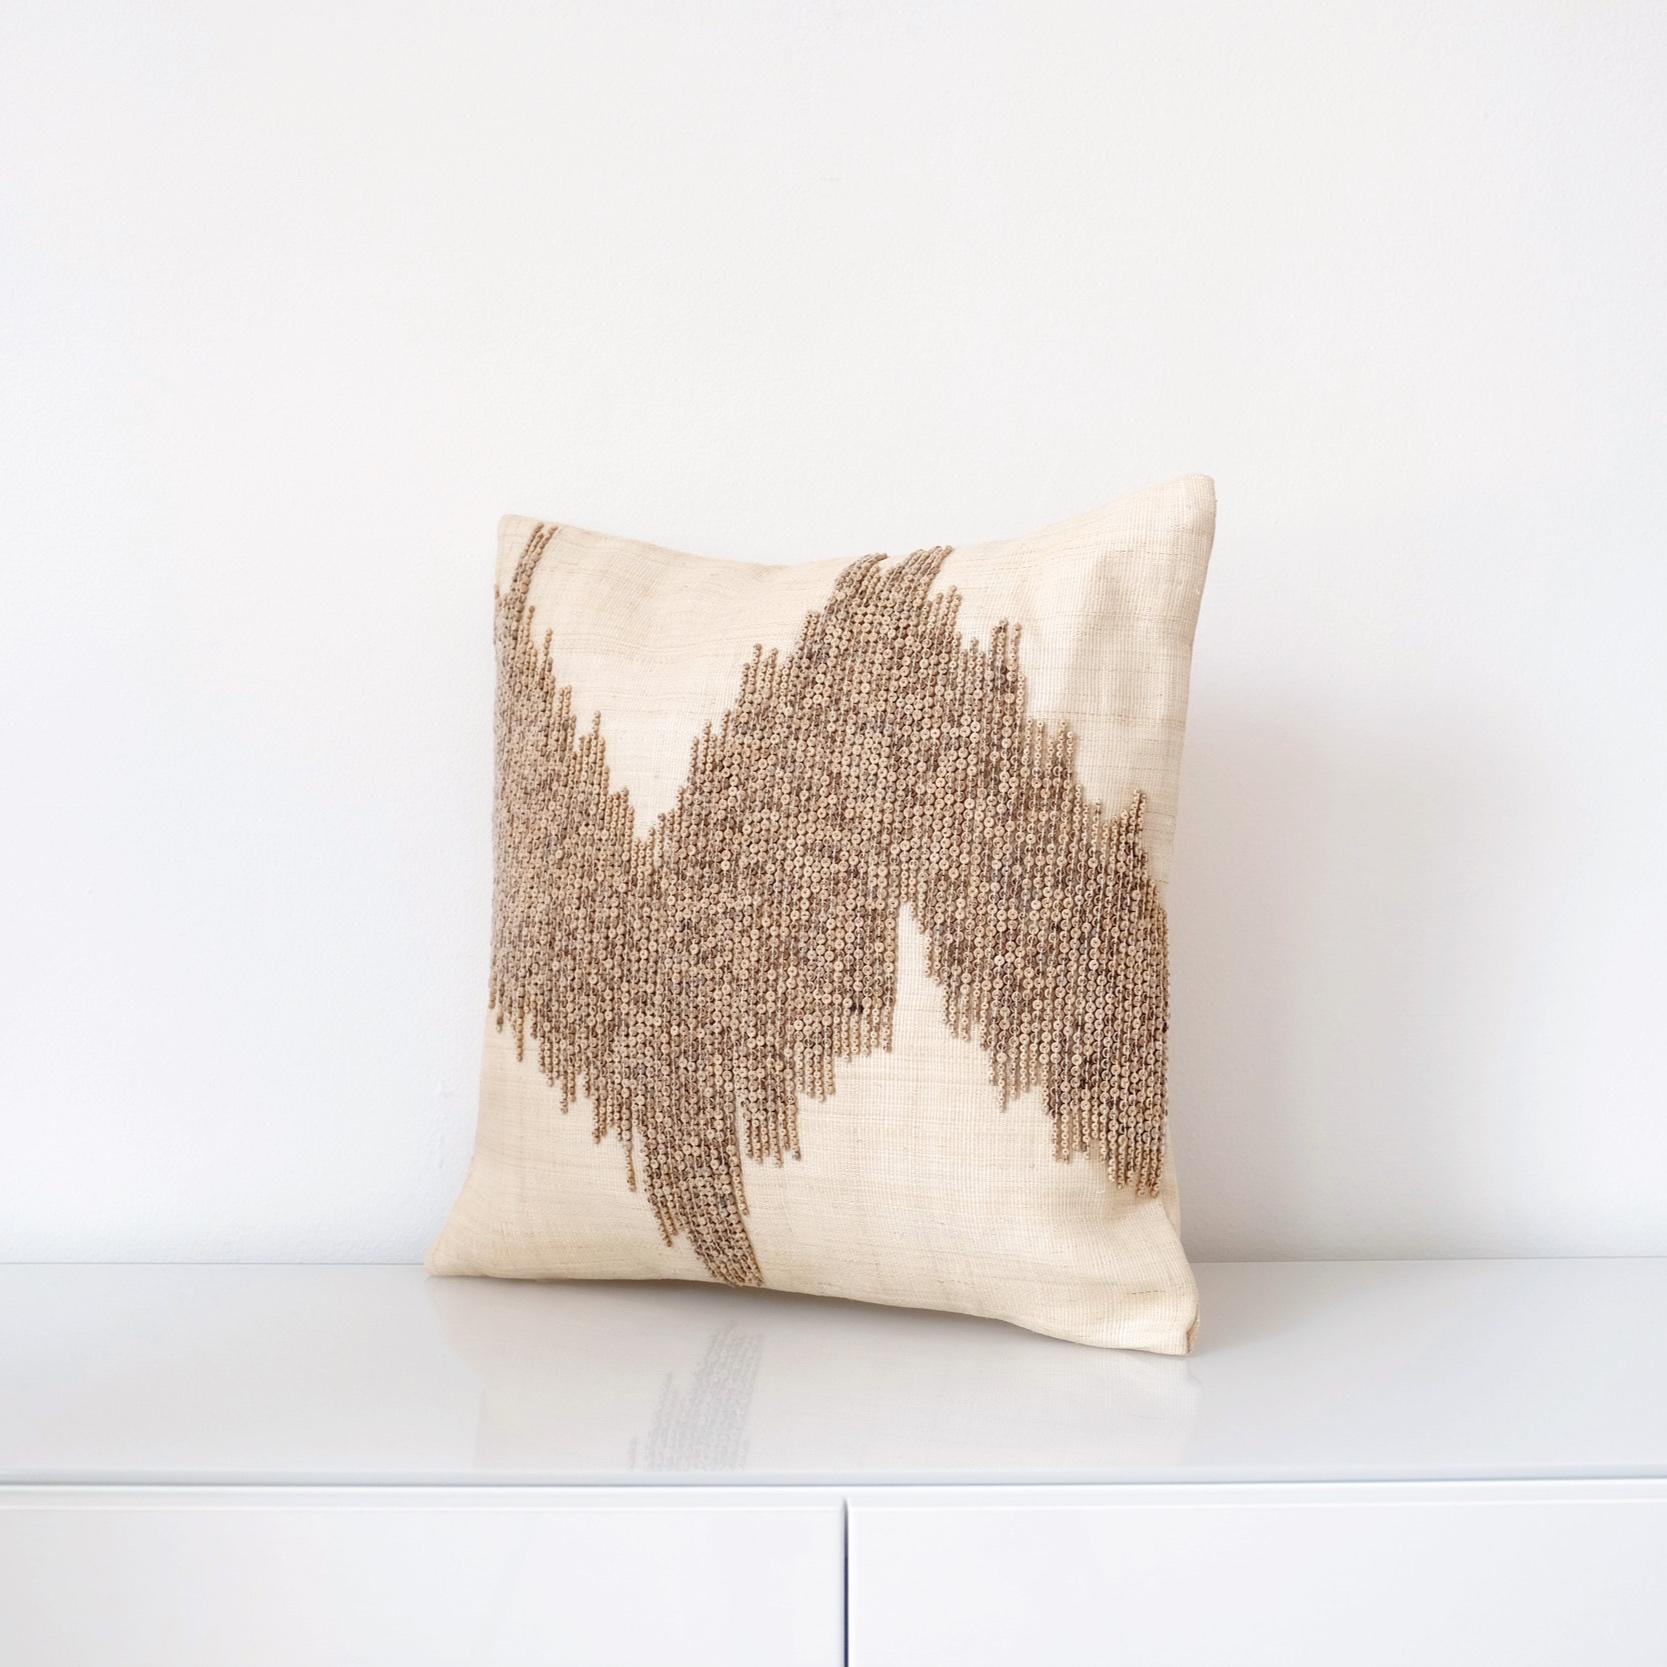 Handcrafted cushion cover made with naturally dyed and delicately woven T’nalak cloth from Abaca fibres and fastened with coconut shell buttons
Colour: light sand and oatmeal

Measures: 45 x 45 cm
17.7? x 17.7?
Recommended cushion filler: 56 x